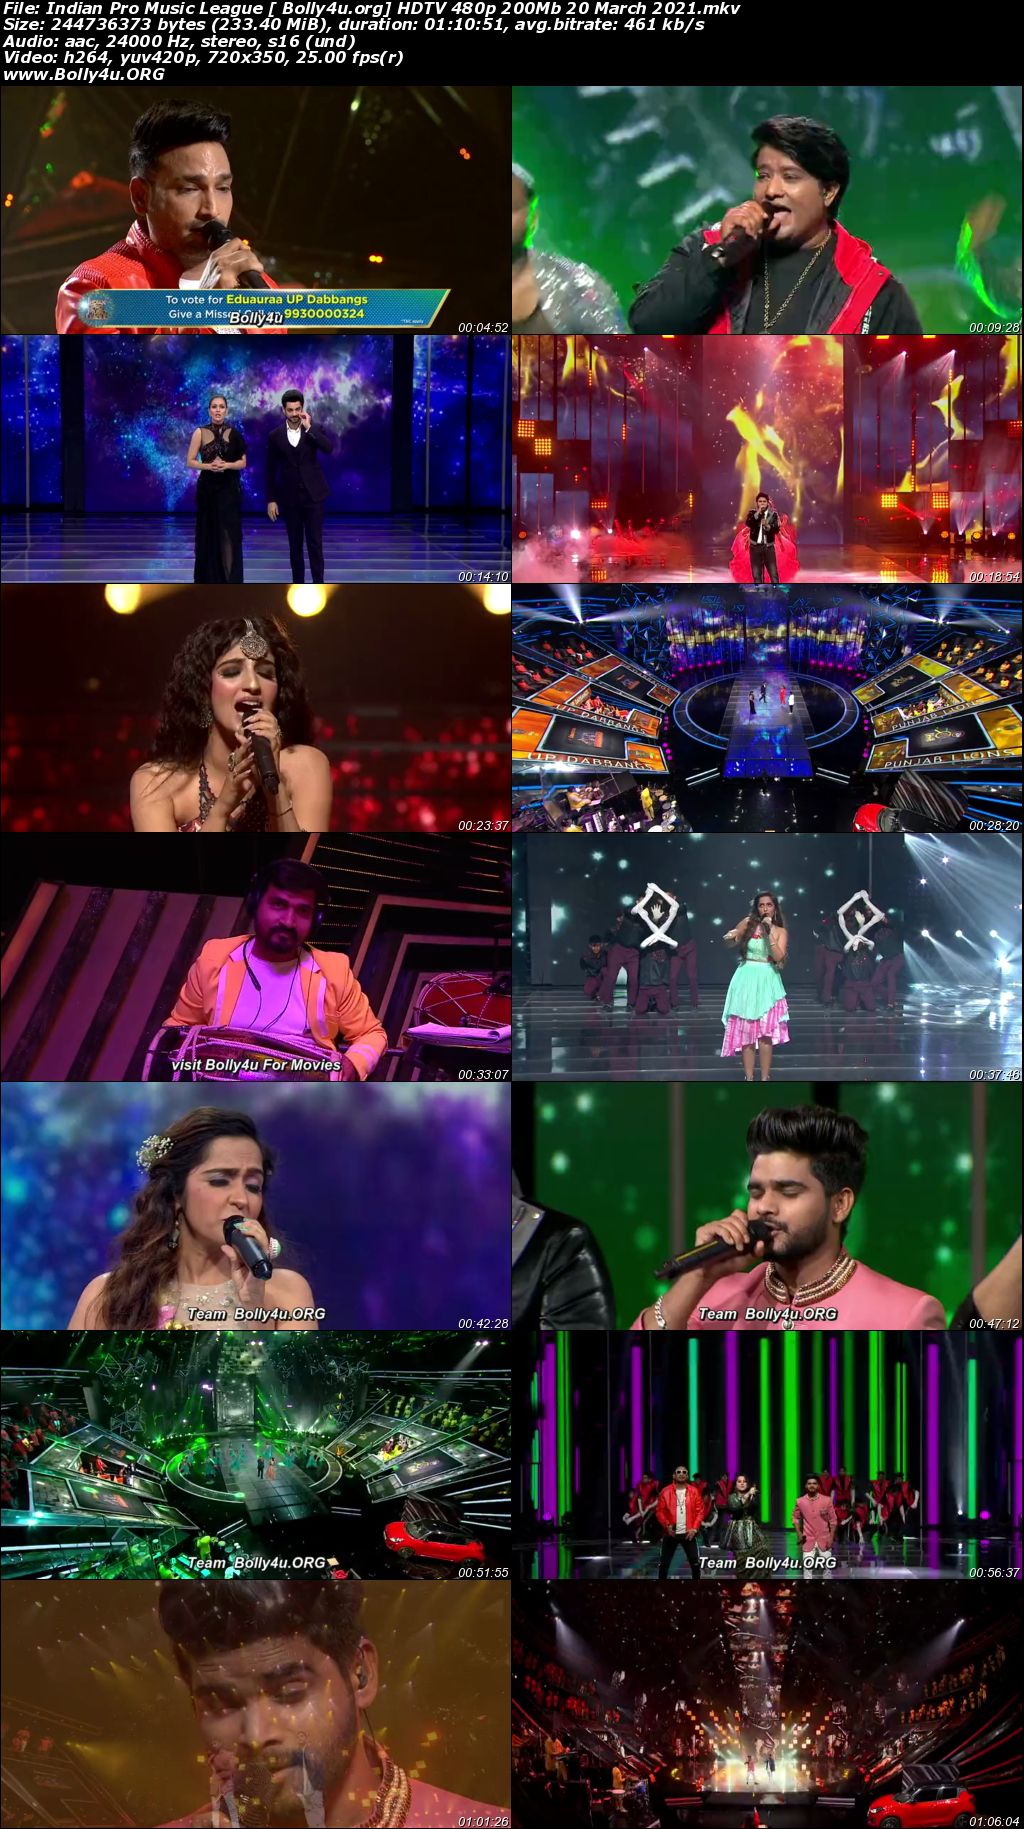 Indian Pro Music League HDTV 480p 200Mb 20 March 2021 Download